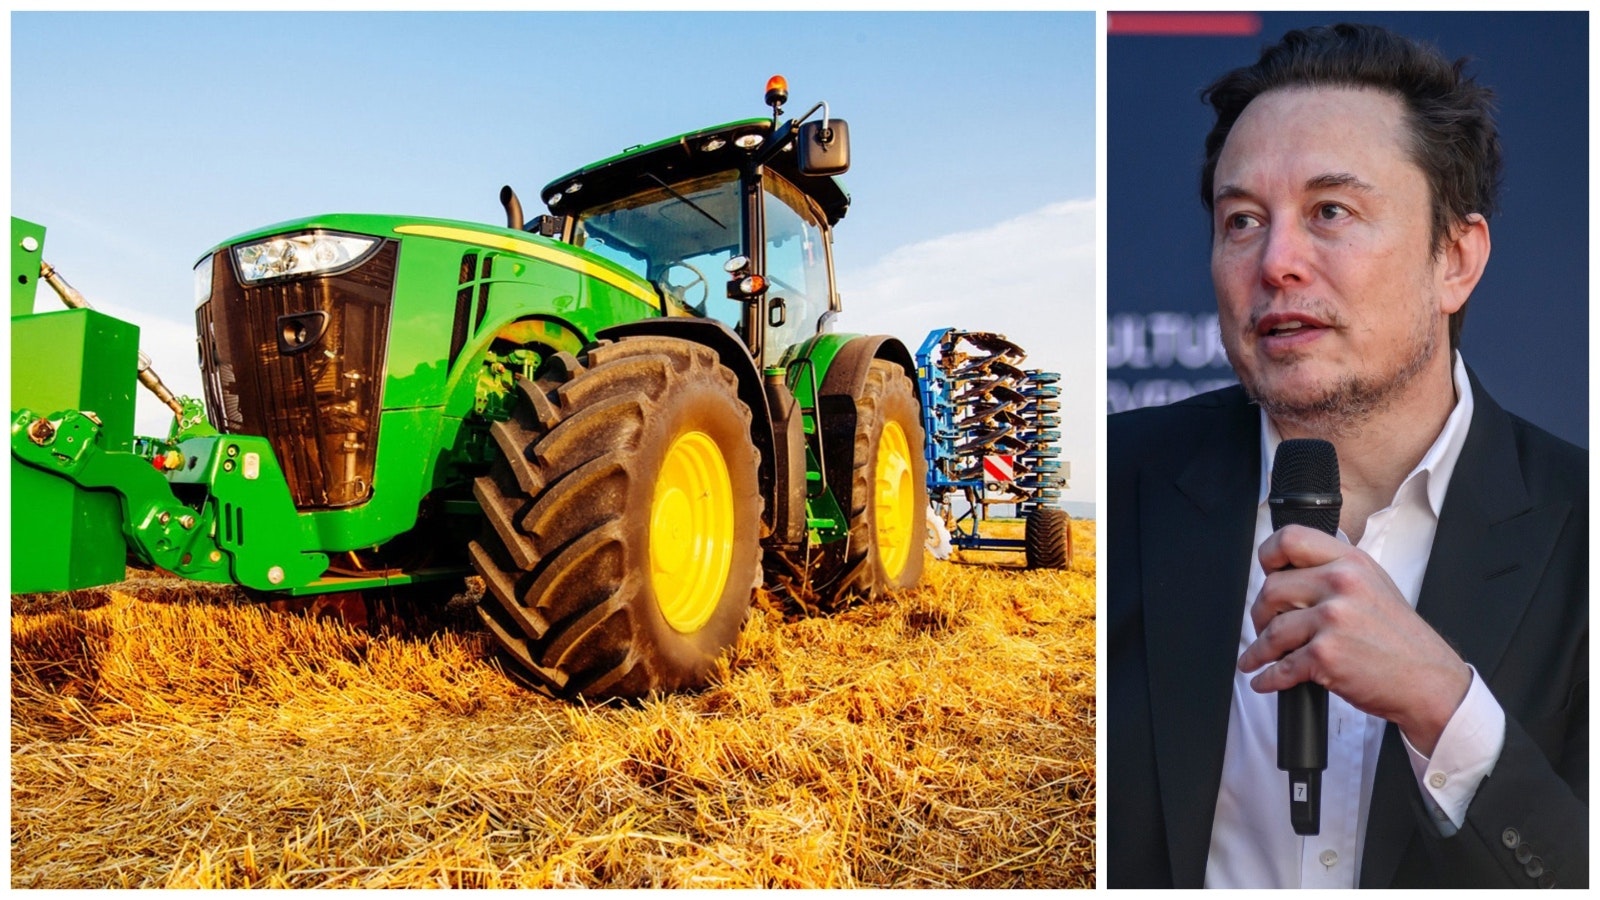 Wyoming farmers say they're skeptical of a new partnership with Elon Musk's SpaceX corp. and Starlink to connect internet to John Deere tractors.